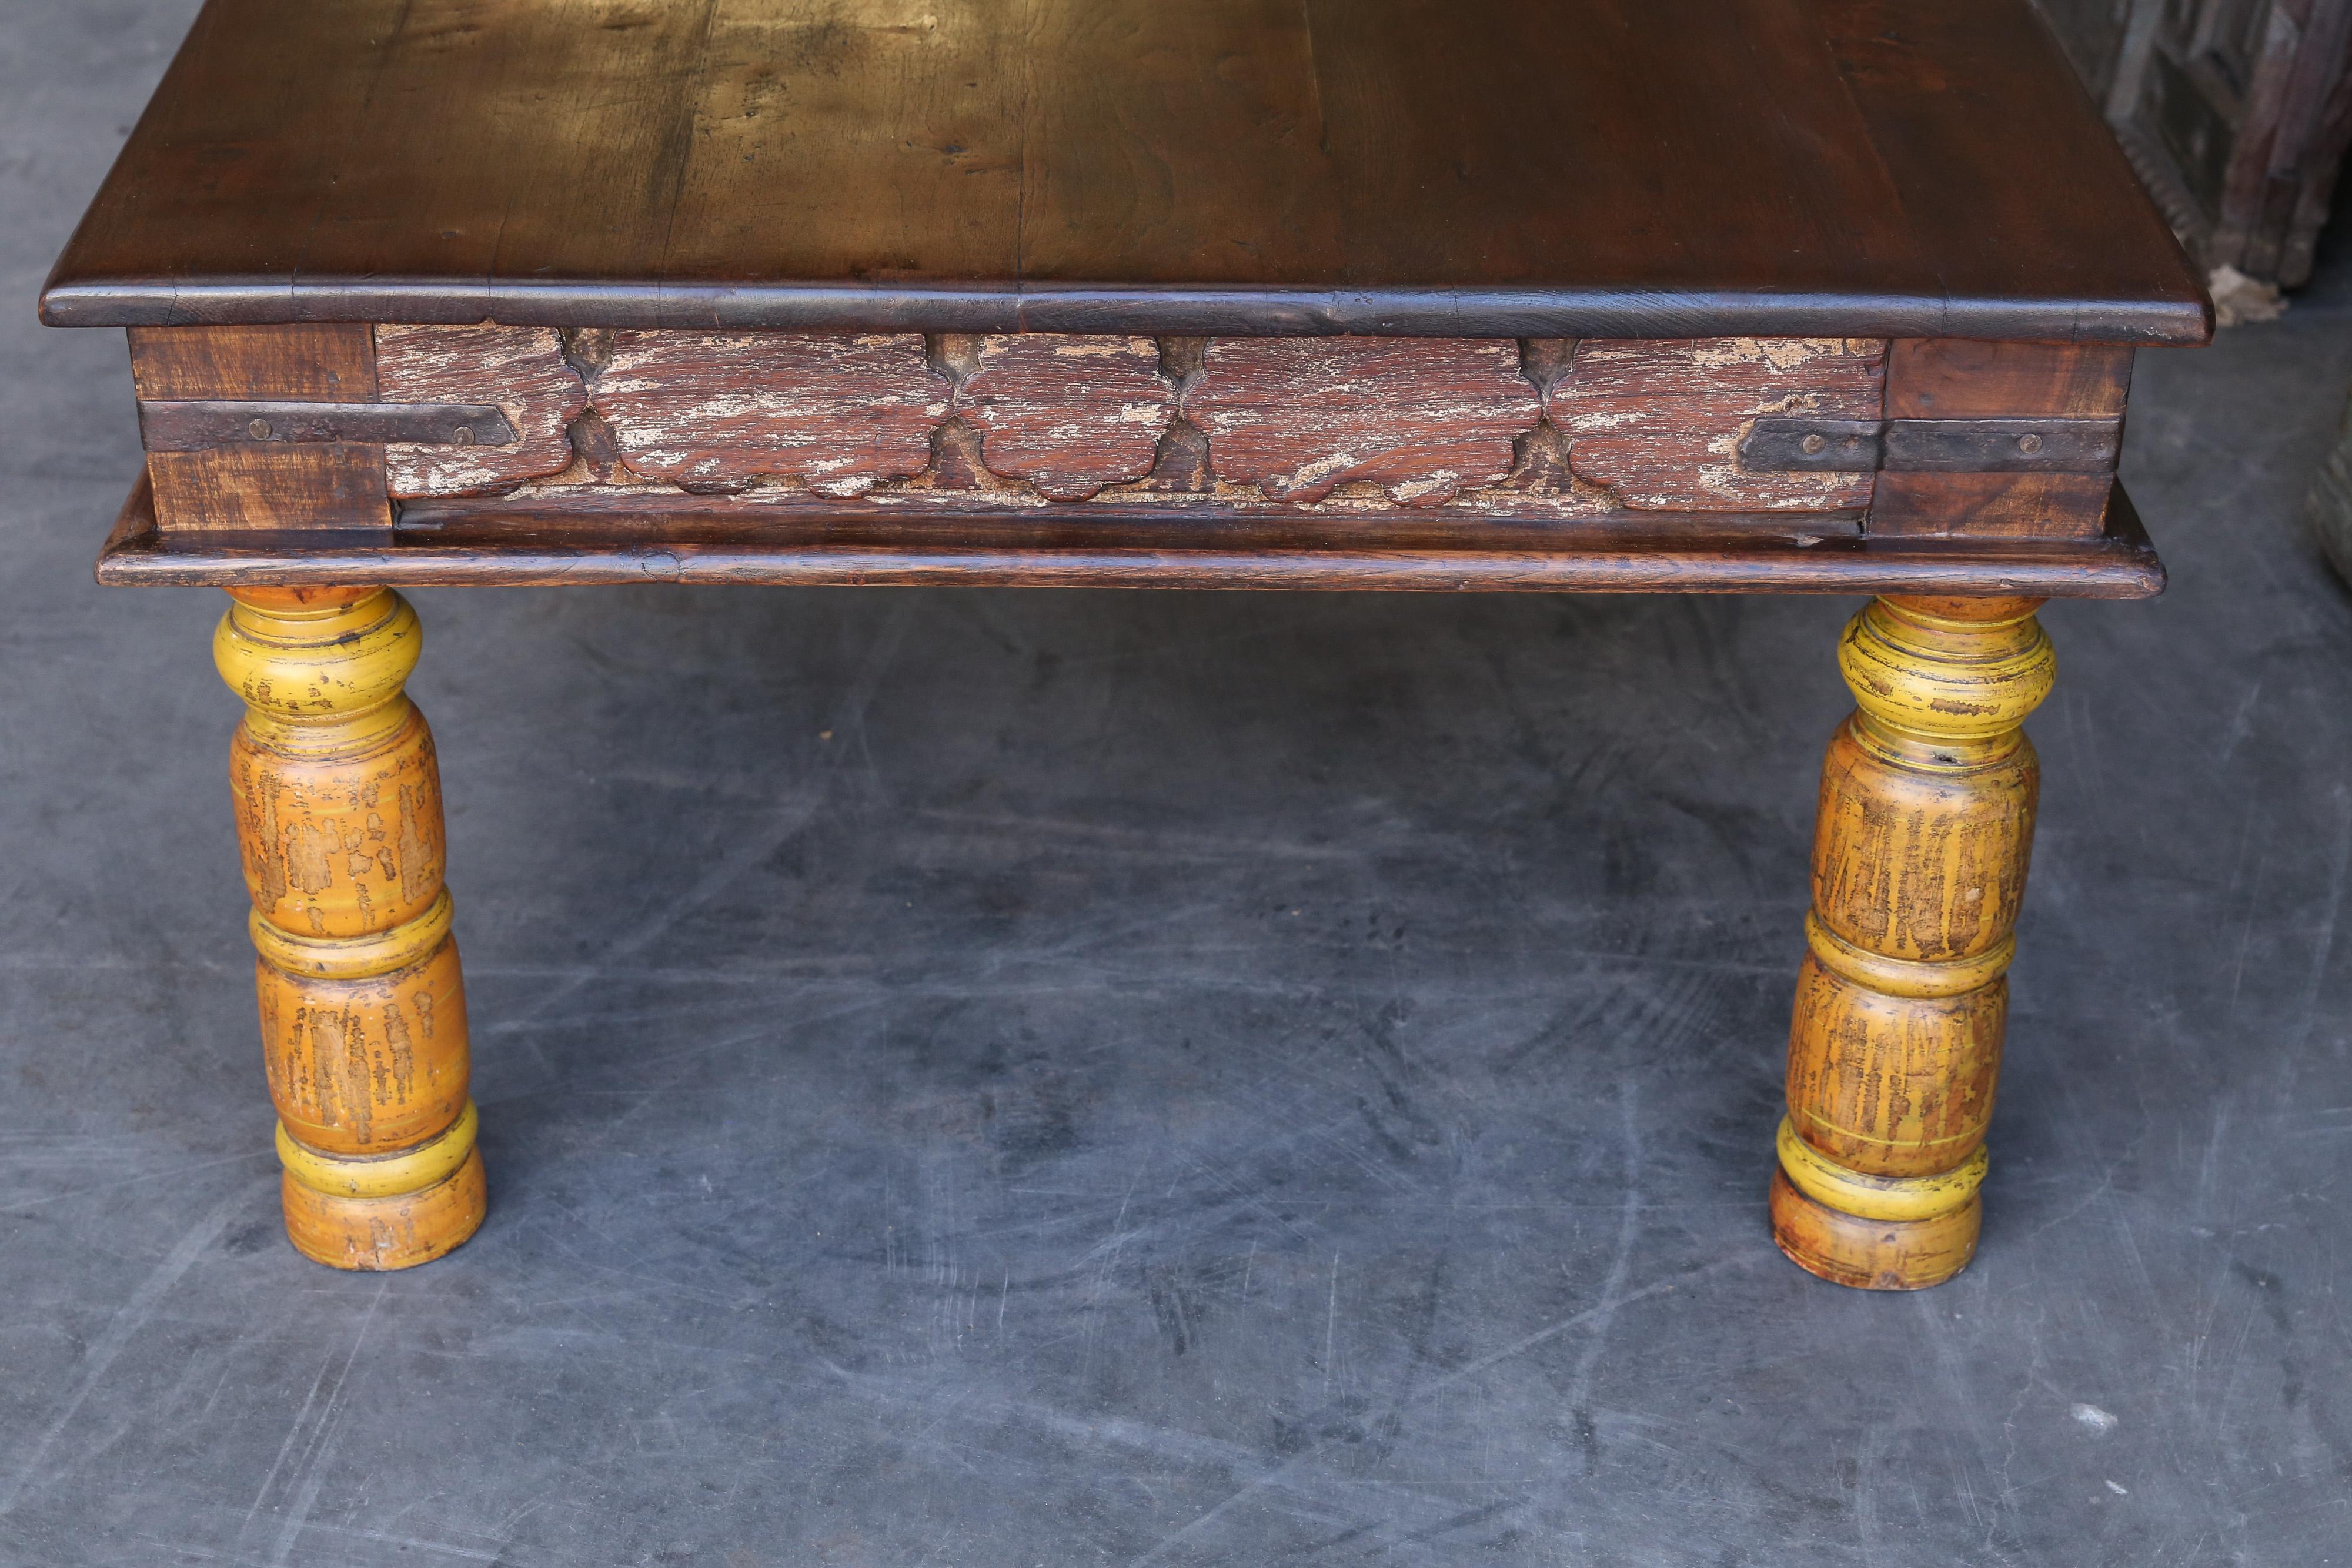 19th Century Idealistic Solid Teak Wood Coffee Table from a Tea Plantation For Sale 8